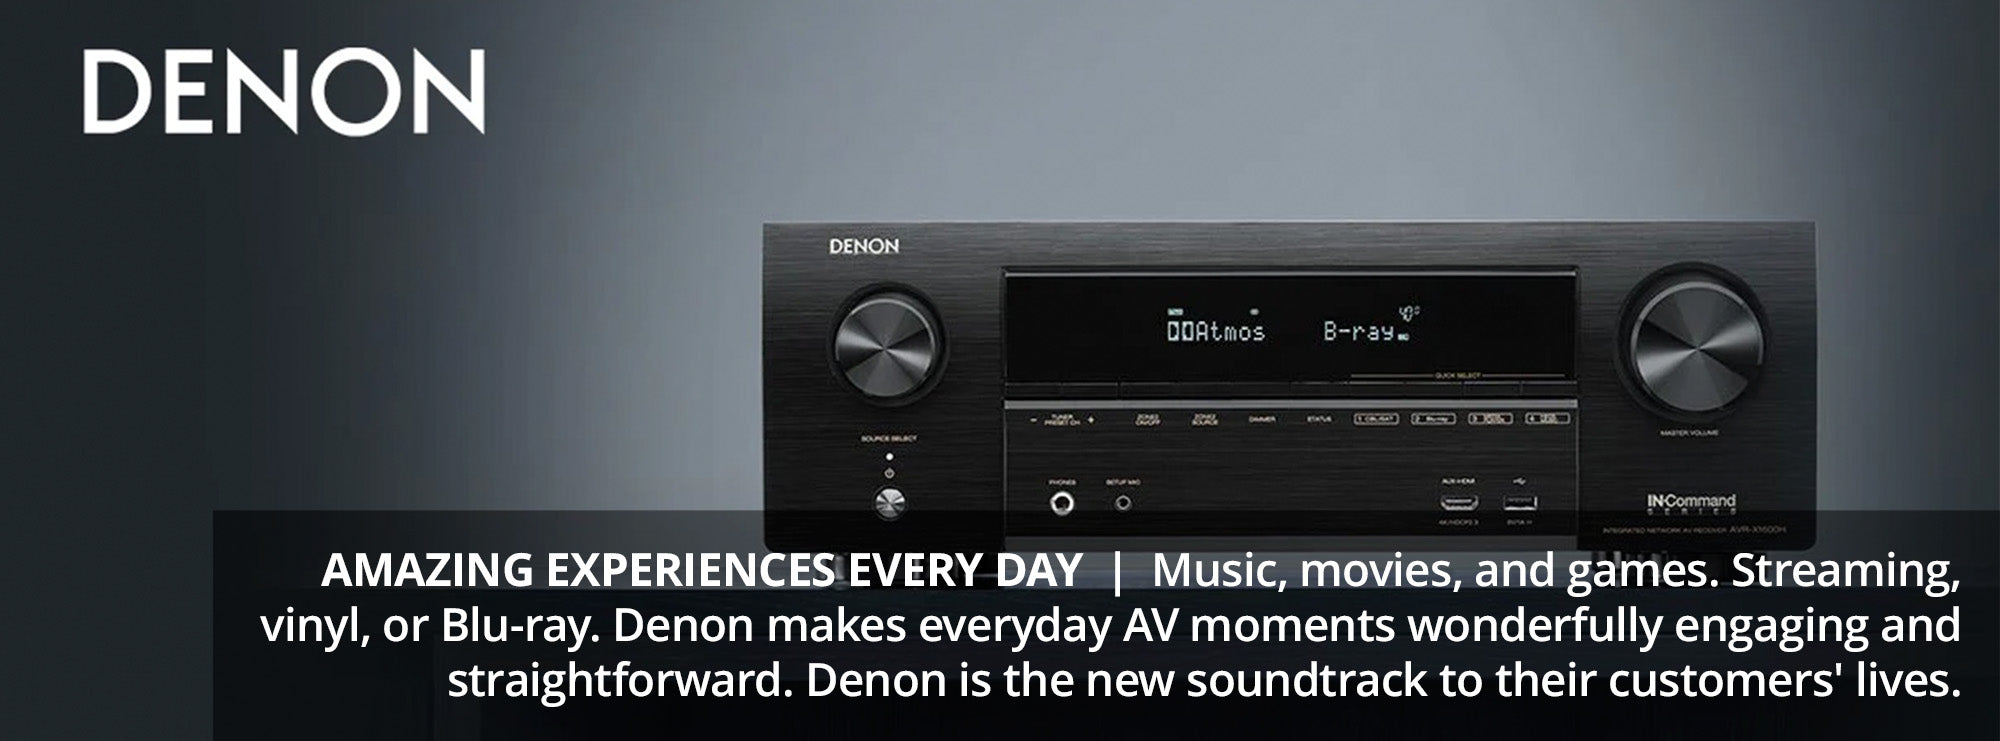 AMAZING EXPERIENCES EVERY DAY Music, movies, and games. Streaming, vinyl, or Blu-ray. Denon makes everyday AV moments wonderfully engaging and straightforward. Denon is the new soundtrack to their customers' lives.